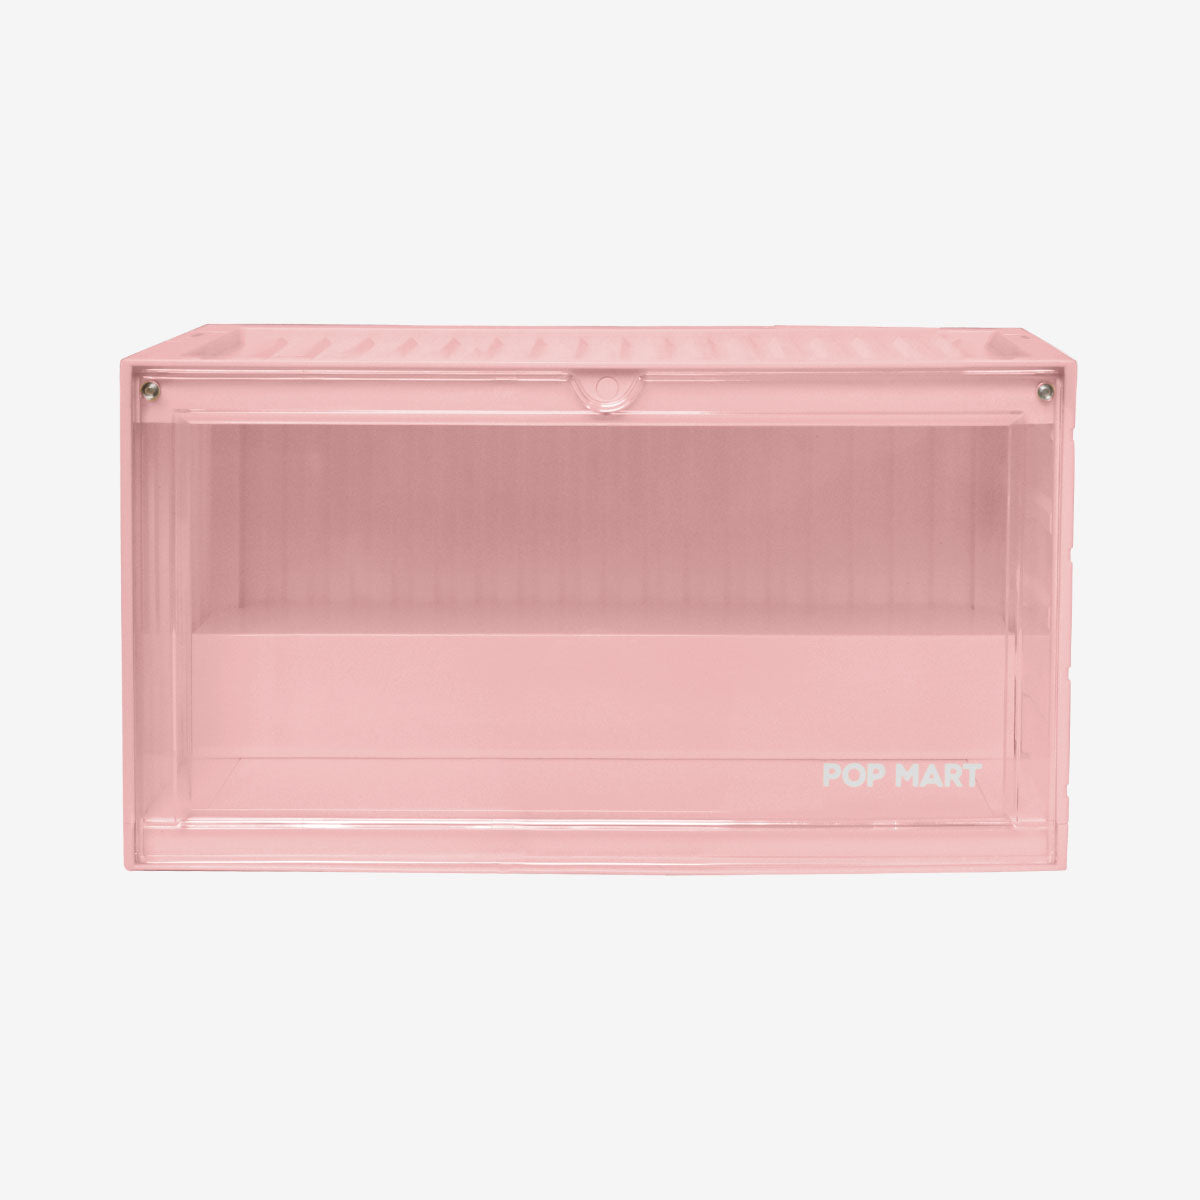 【Limited】POP MART LED Luminous Display Container -PURE PINK